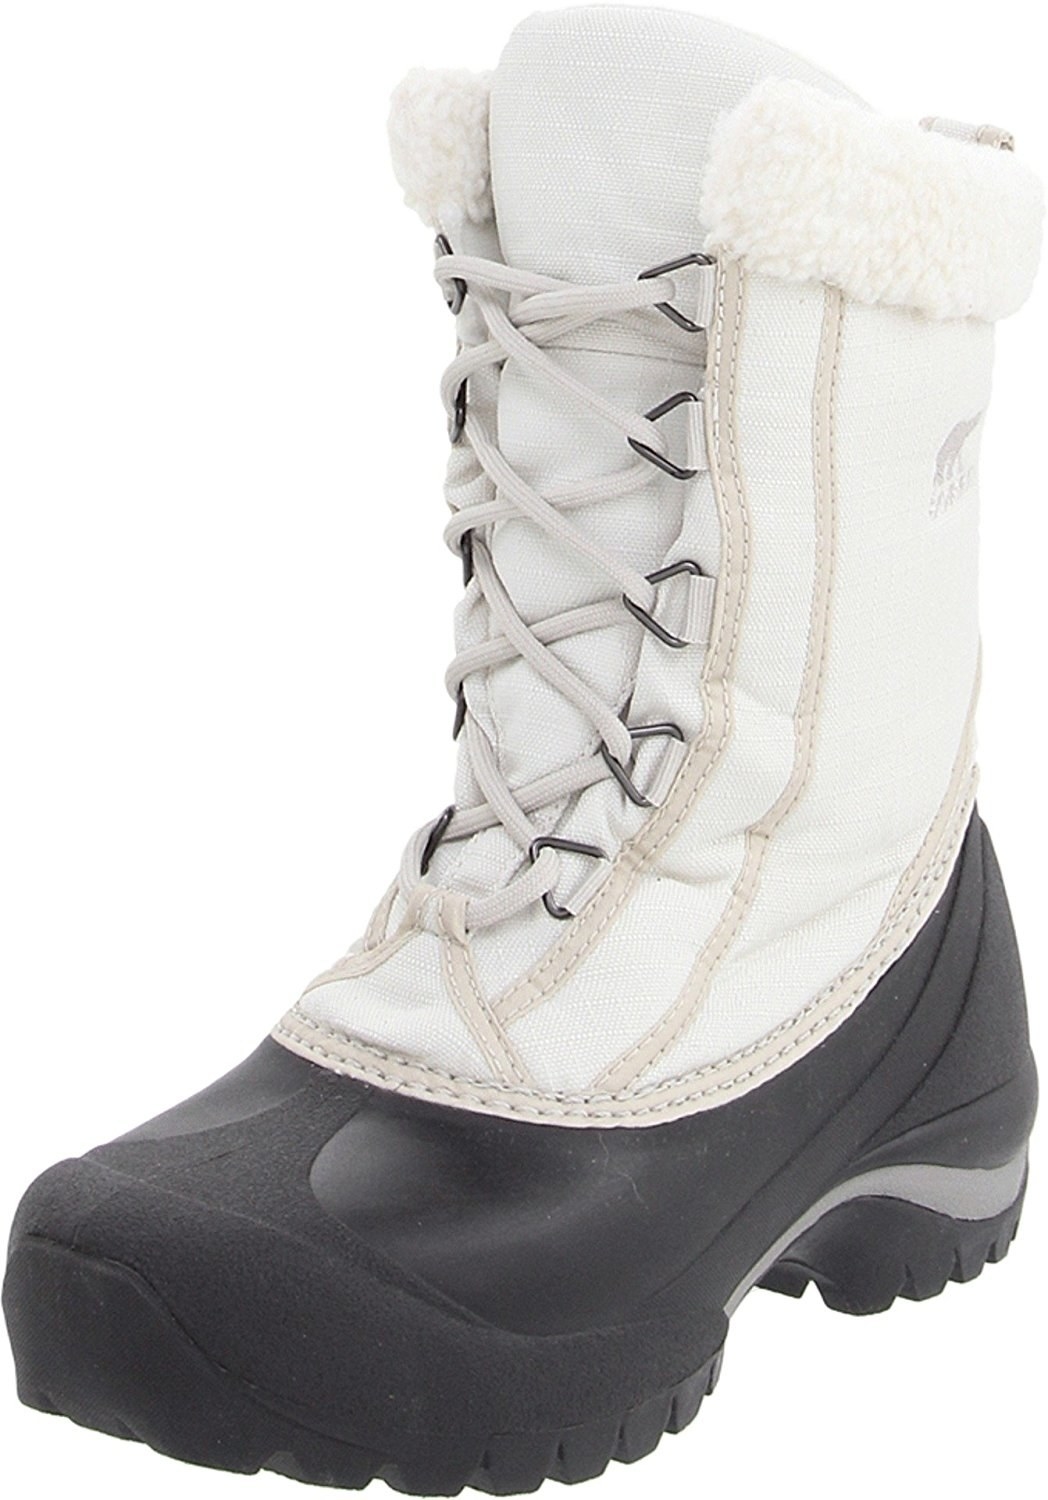 Best Winter Boots And Snow Boots 